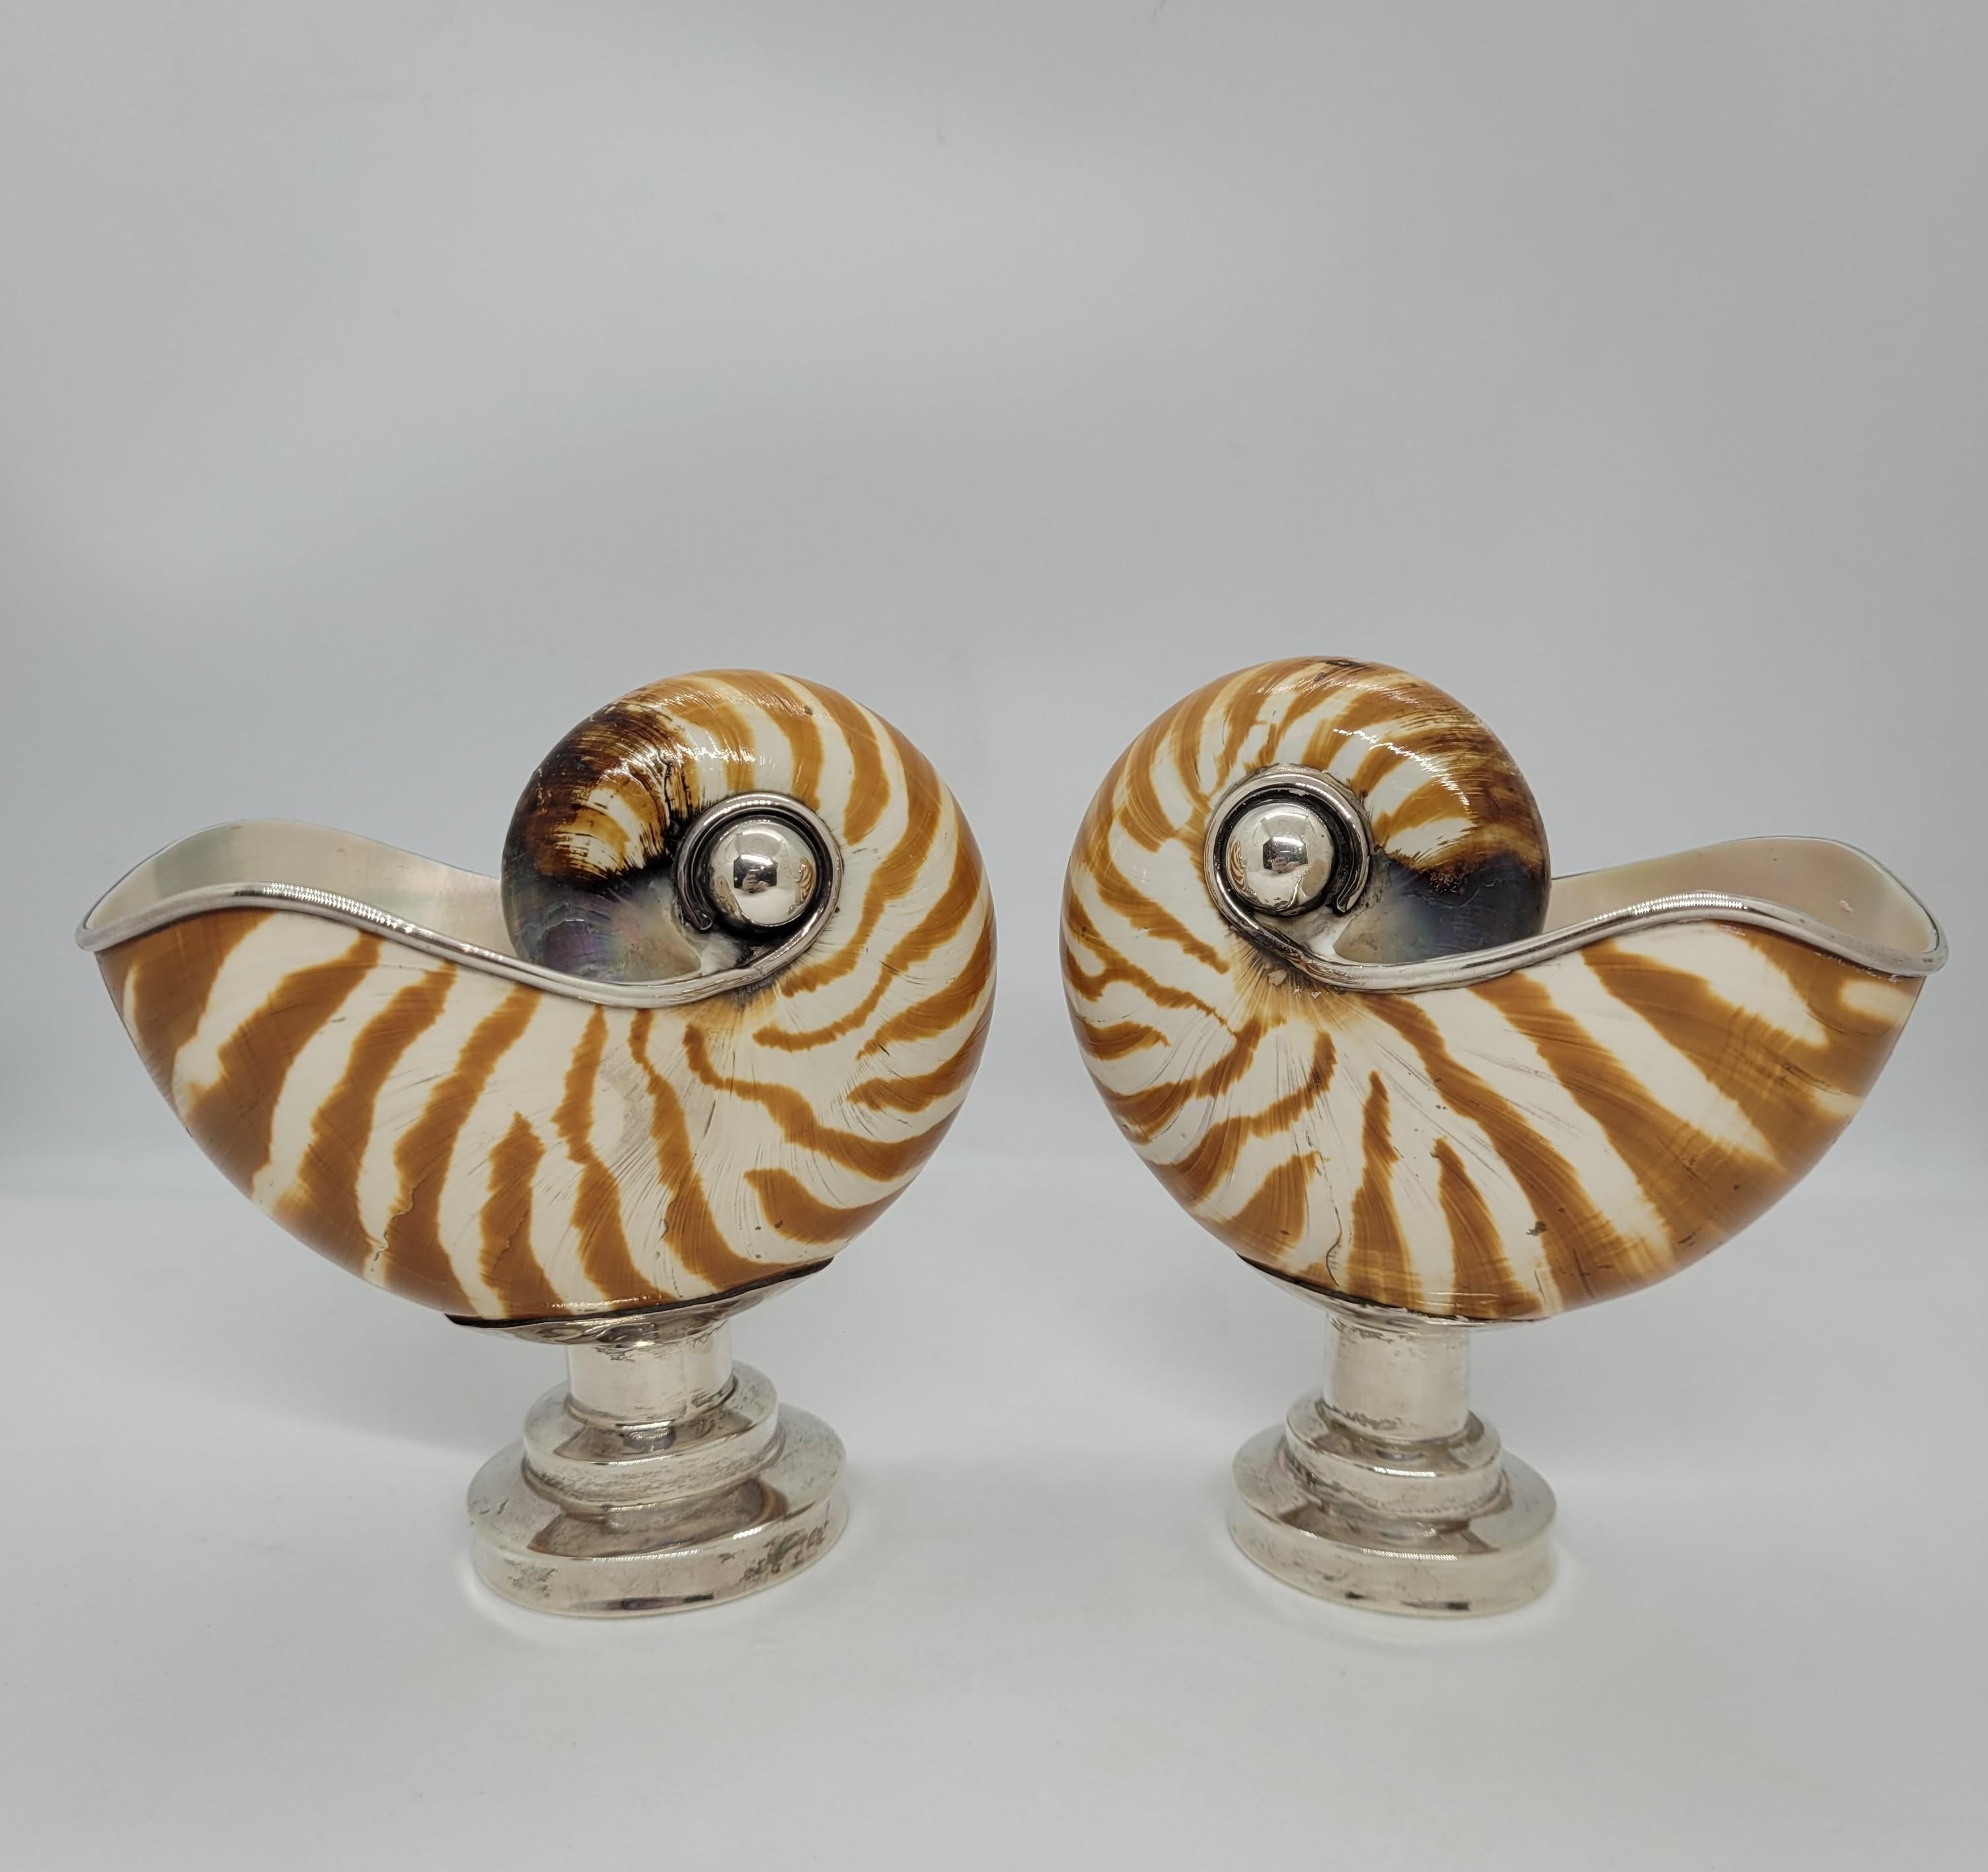 On of a kind  pair of nautilus set in 925 sterling silver, with a highly refined garnish. They come from England, from the beginning of the 20th century. Beginning in the 16th century, nautilus shells from the Pacific Ocean became highly valued by